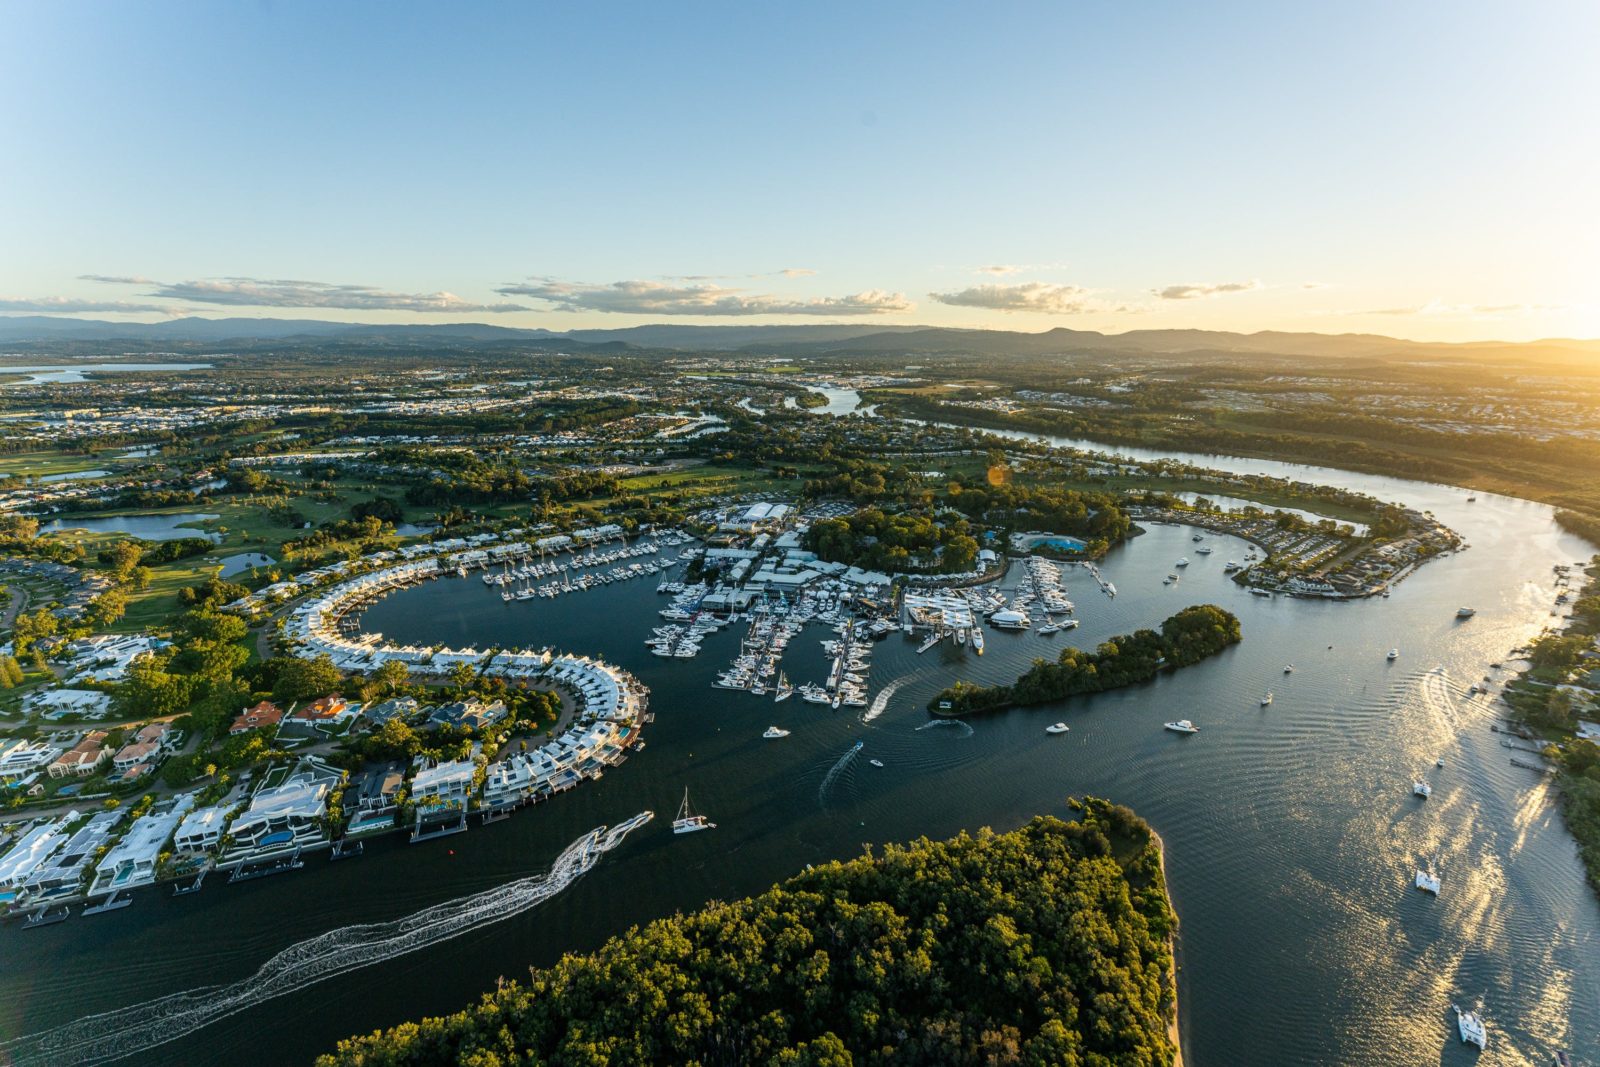 Ariel view of Sanctuary Cove, a harbour filled with white boats and surrounded by greenery.